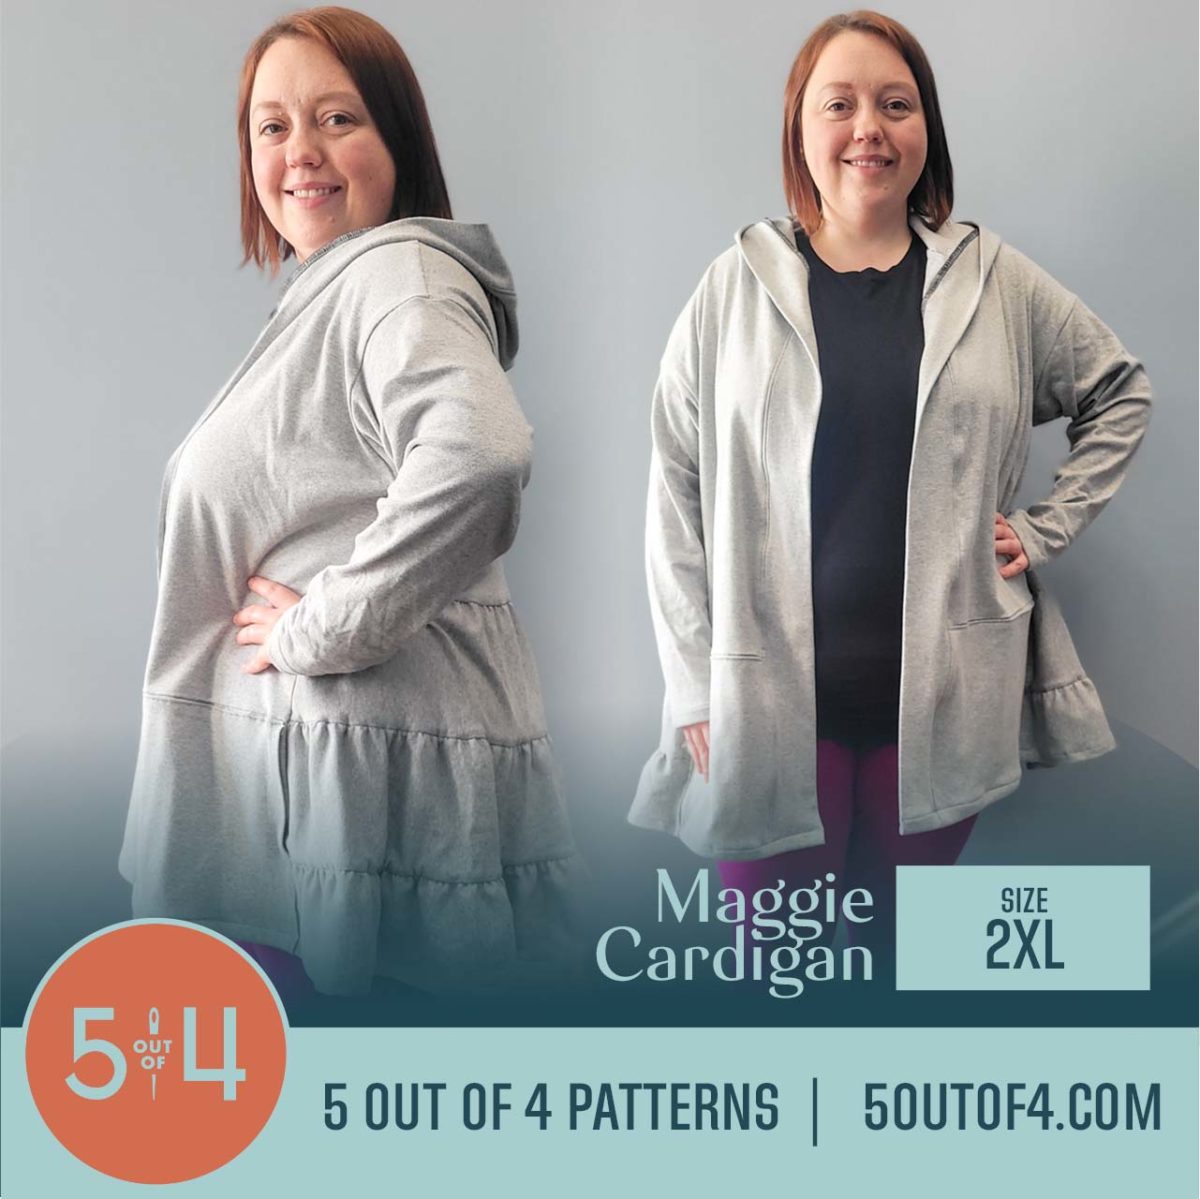 Maggie Cardigan - 5 out of 4 Patterns